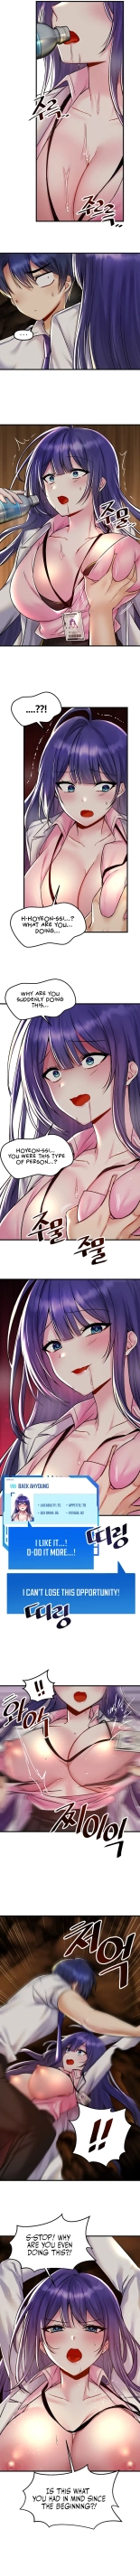 Trapped in the Academy's Eroge : page 248